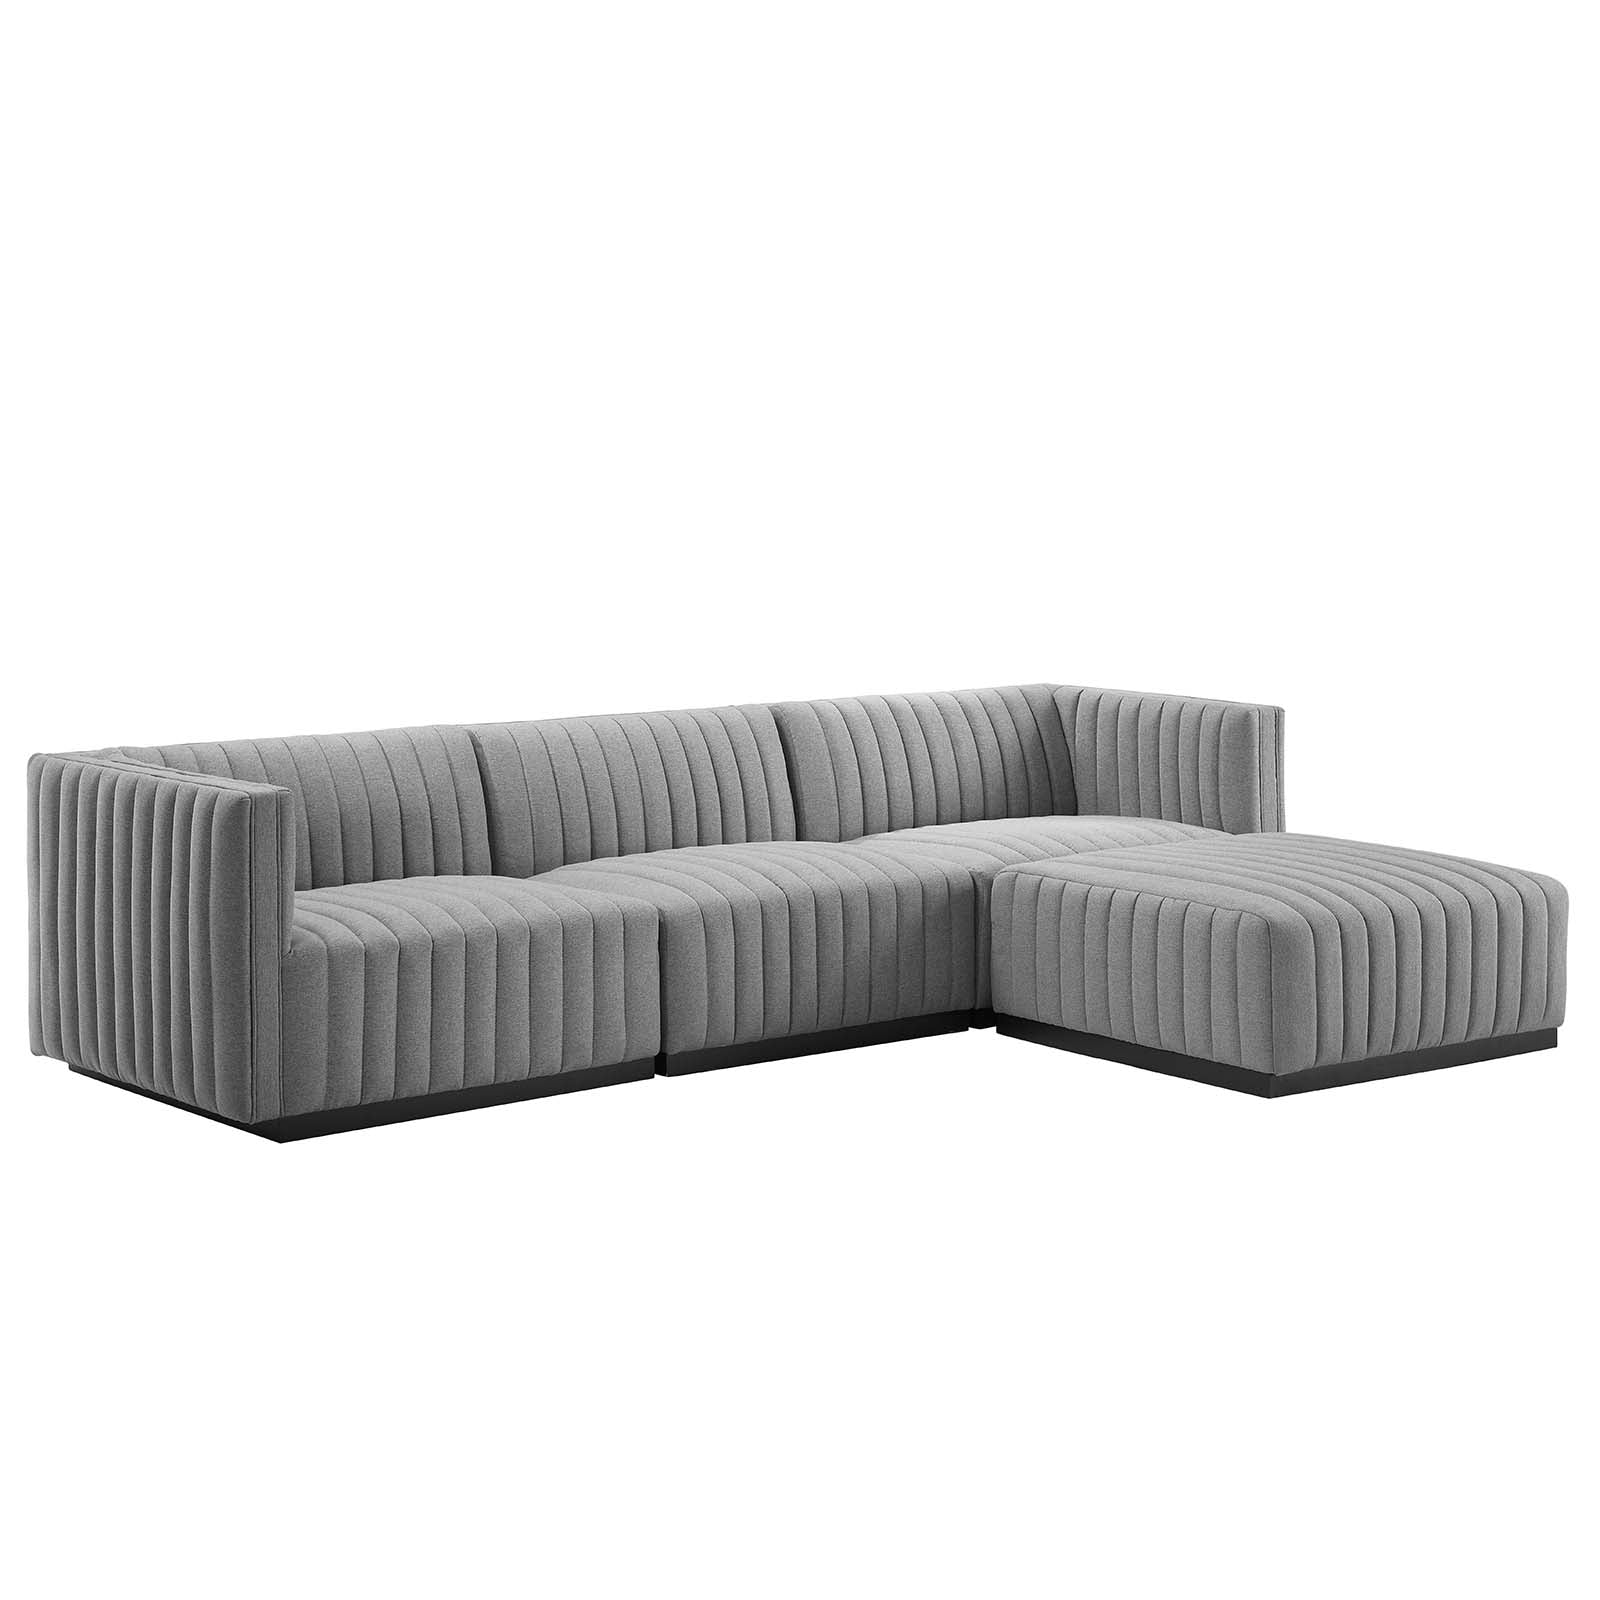 Carla Channel Tufted Upholstered Fabric 4-Piece Sectional Sofa - Elite Maison